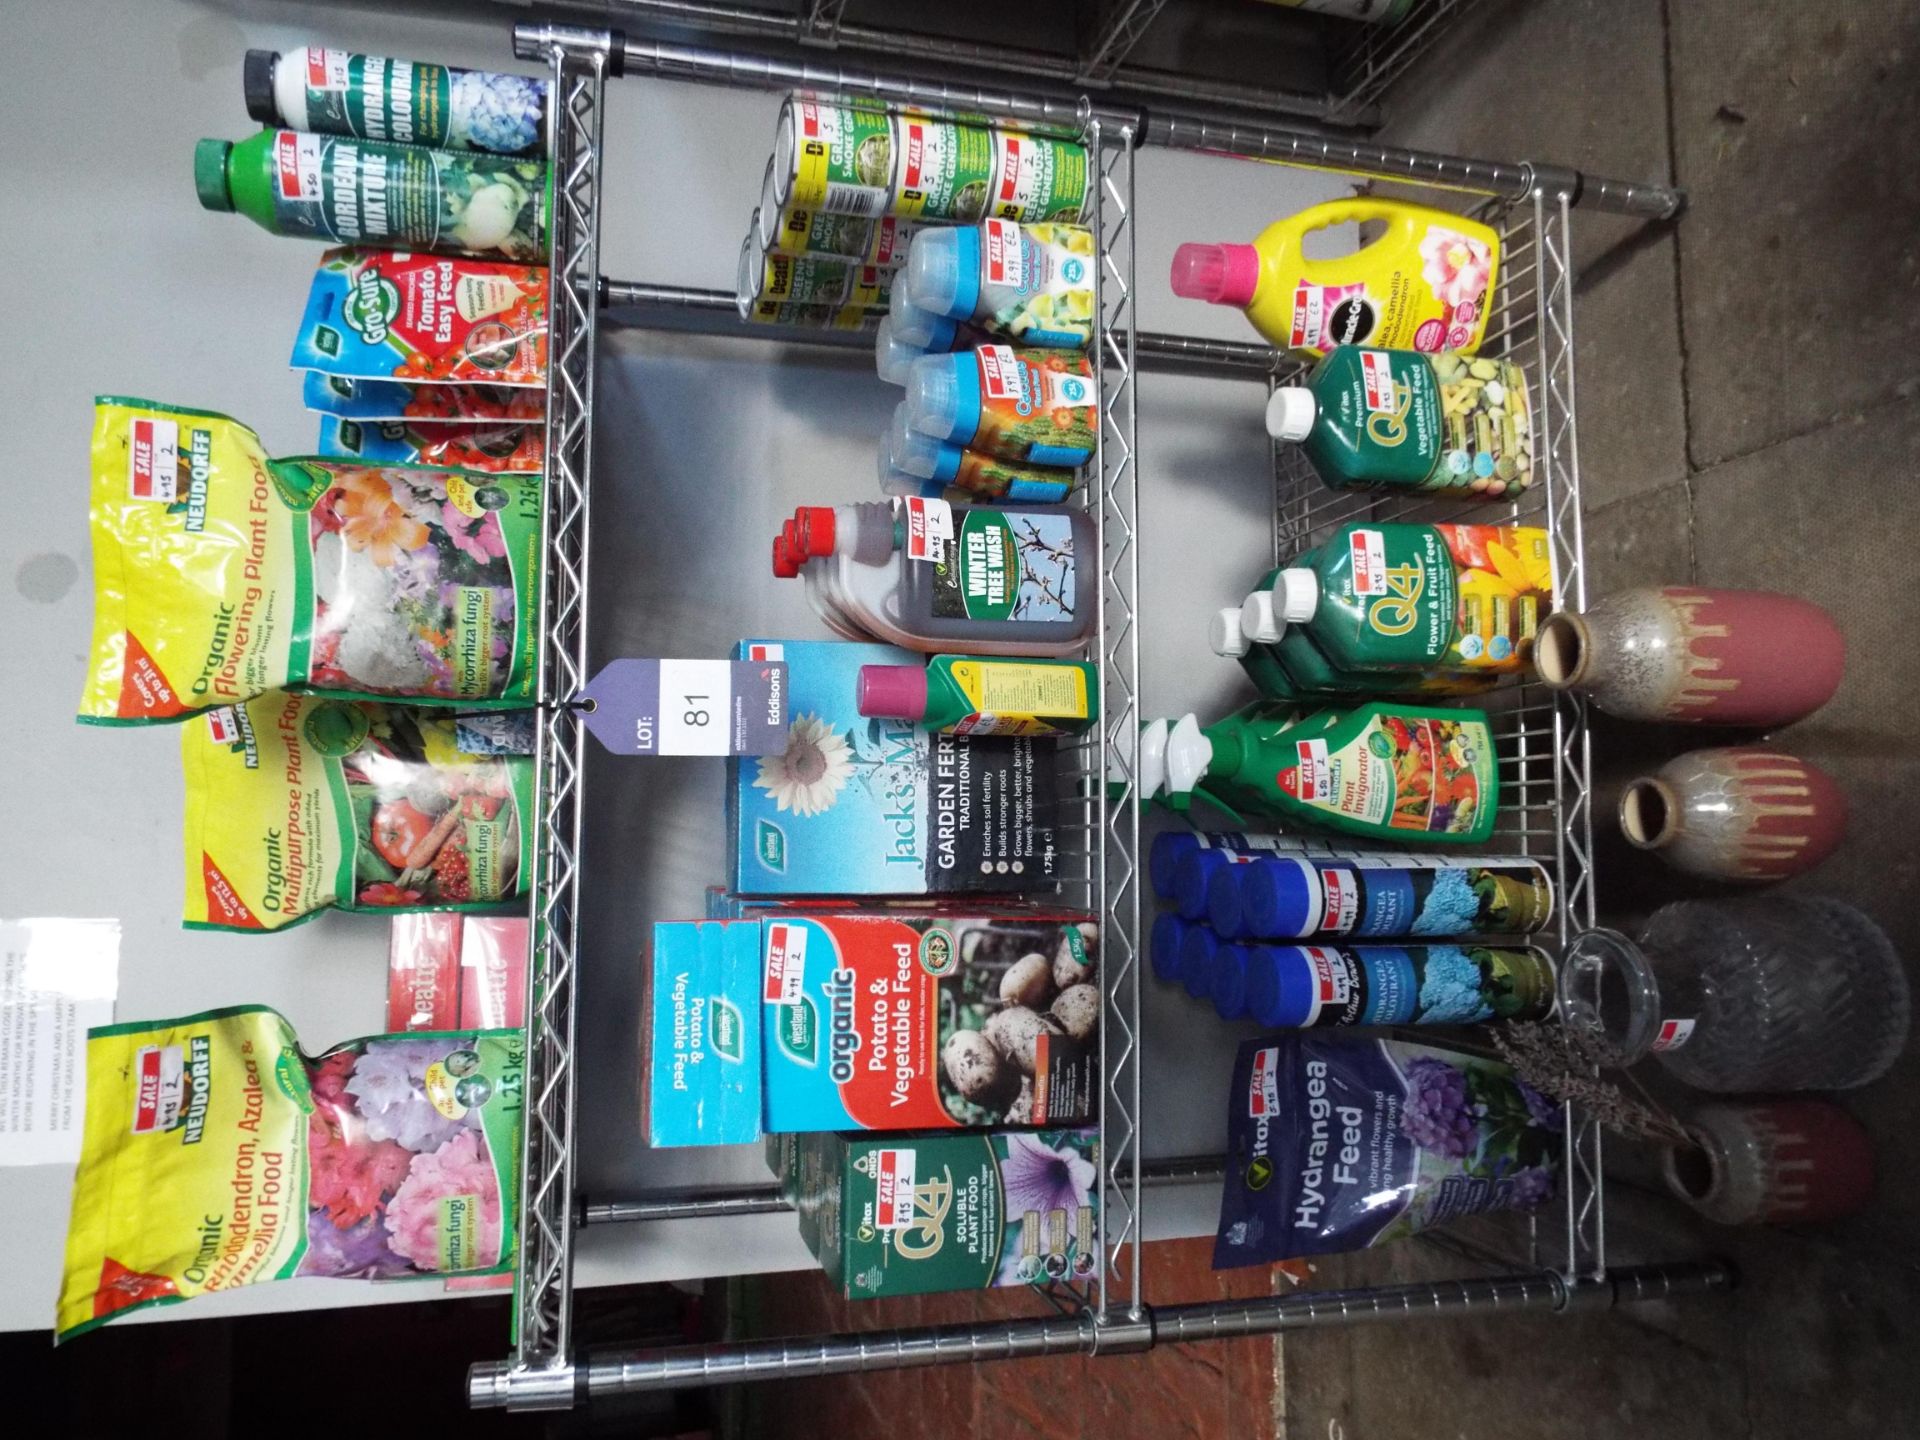 Quantity of Gardening Consumables to include Plant Feed, Fertilizers etc. – Shelf Included - Image 2 of 2